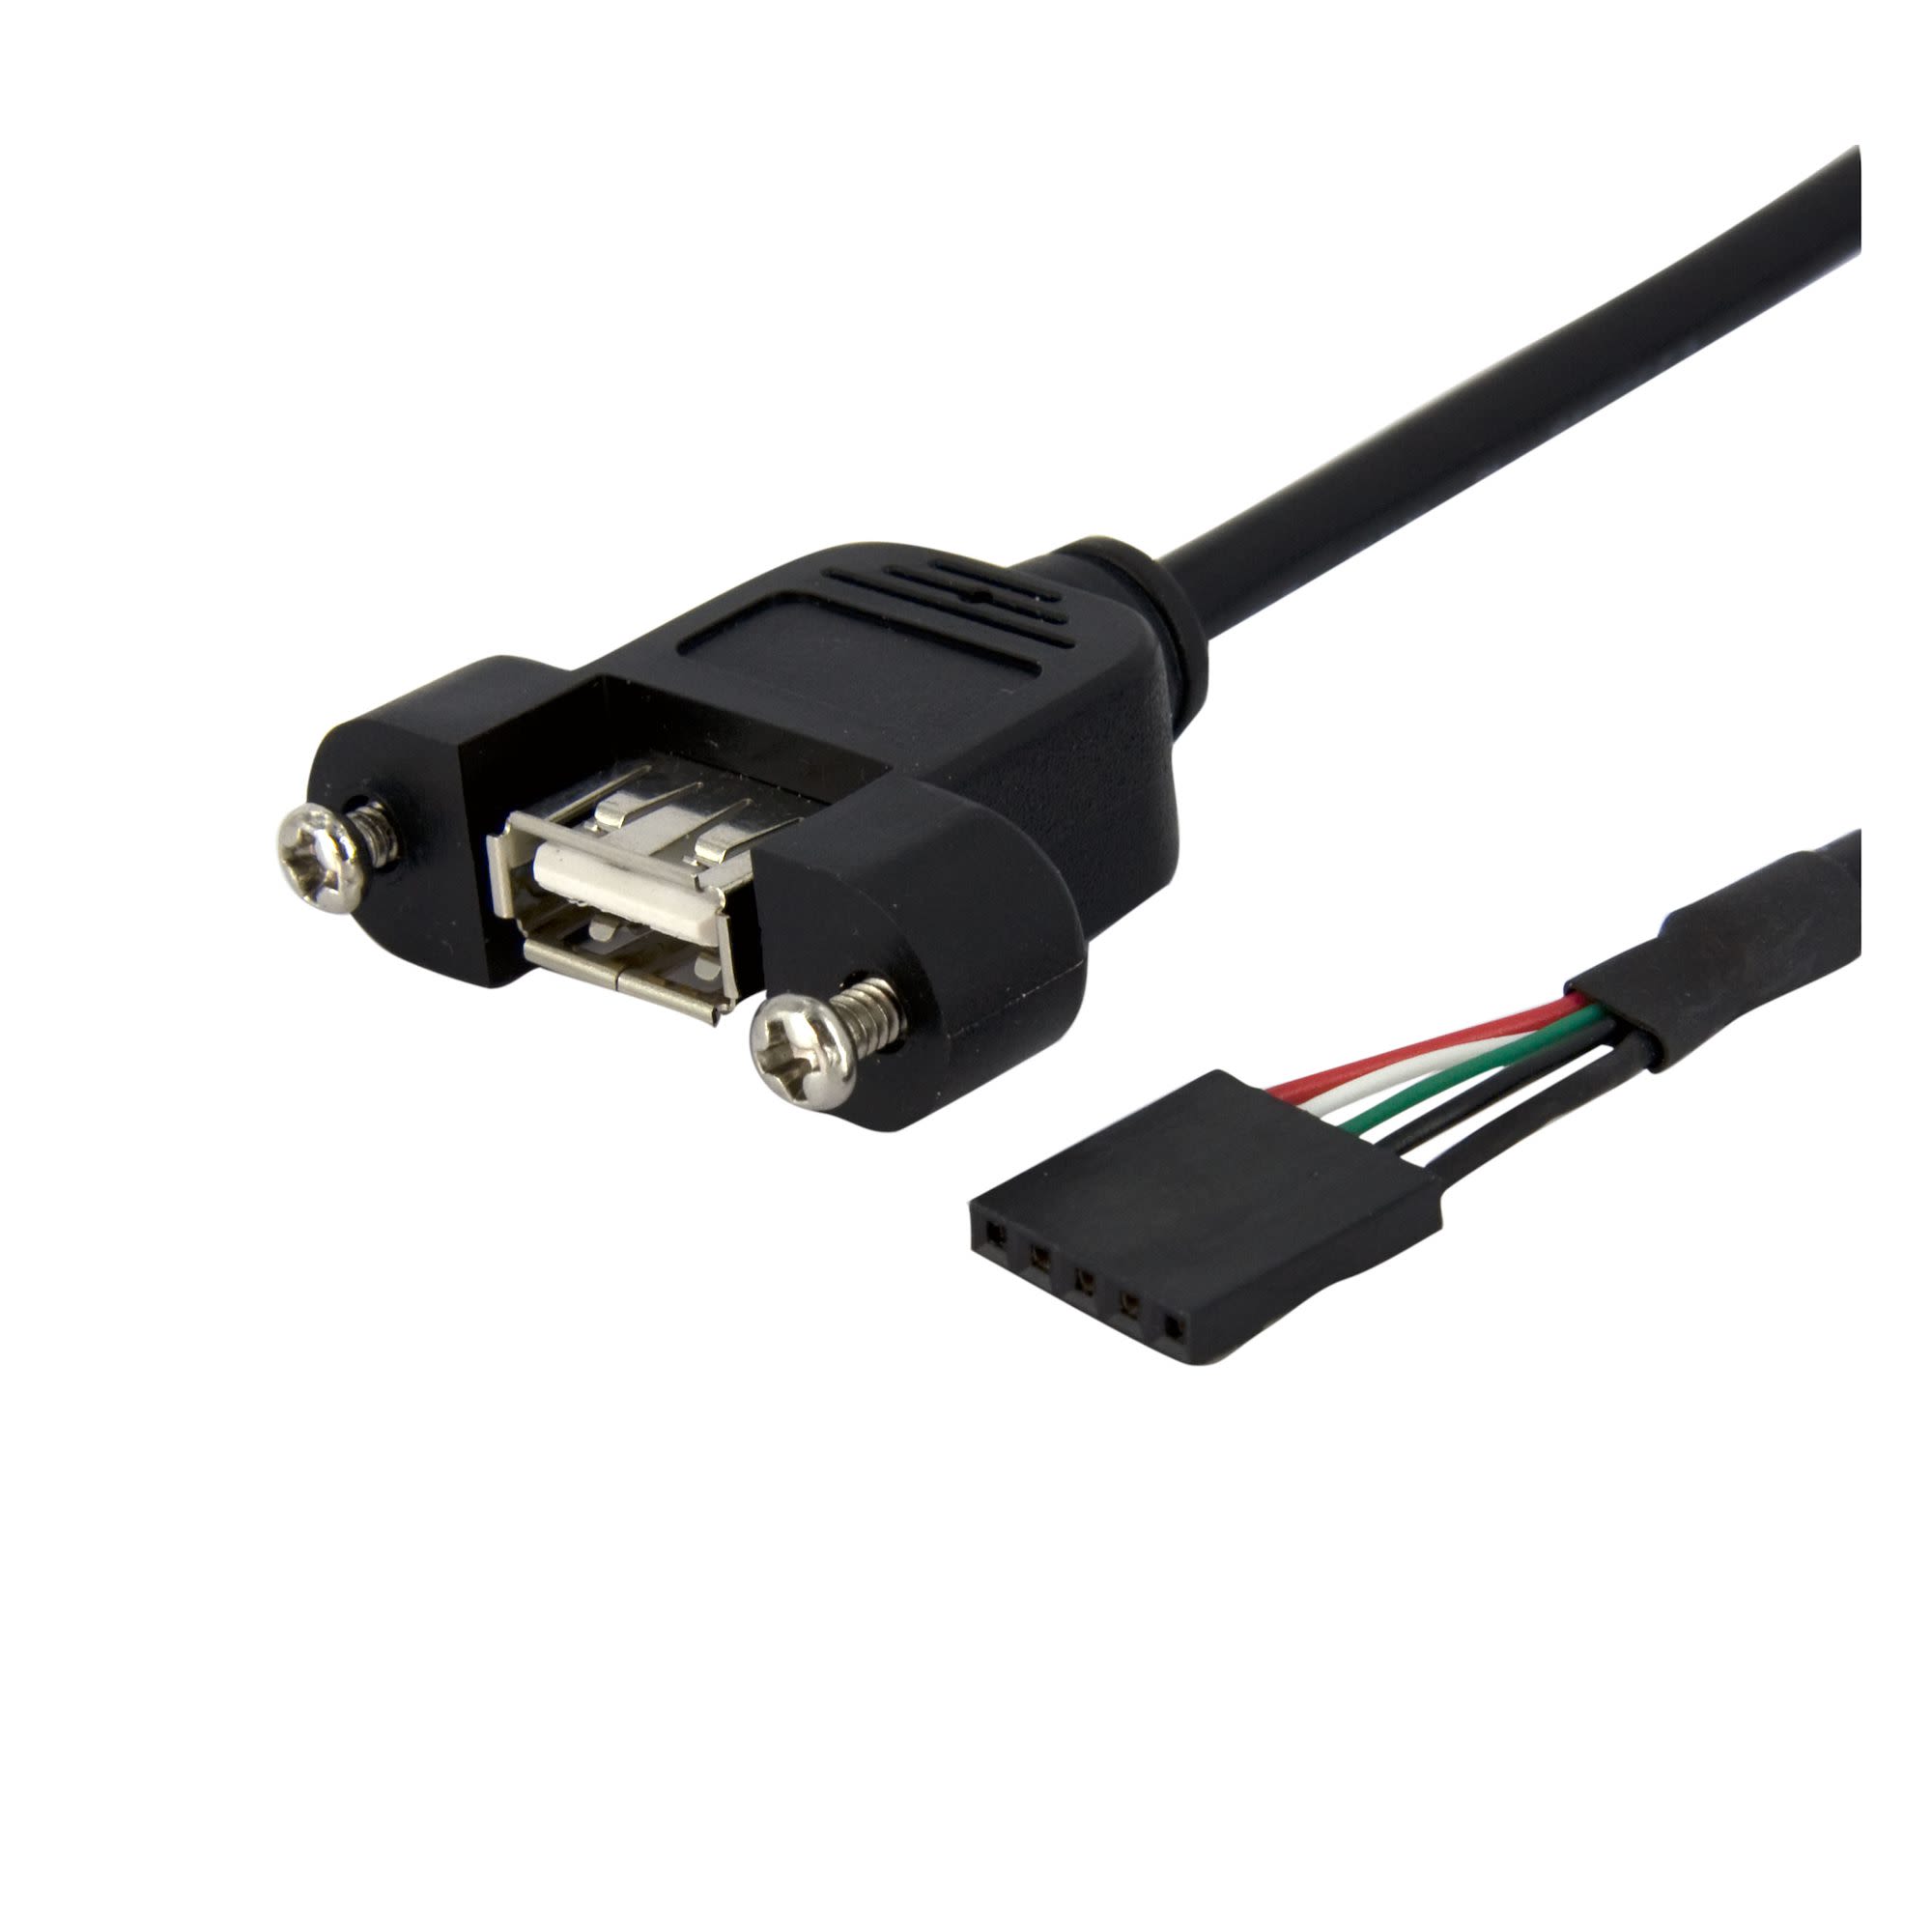 StarTech.com Female USB A to Female 20 Pin IDC Cable, USB 2.0, 900mm